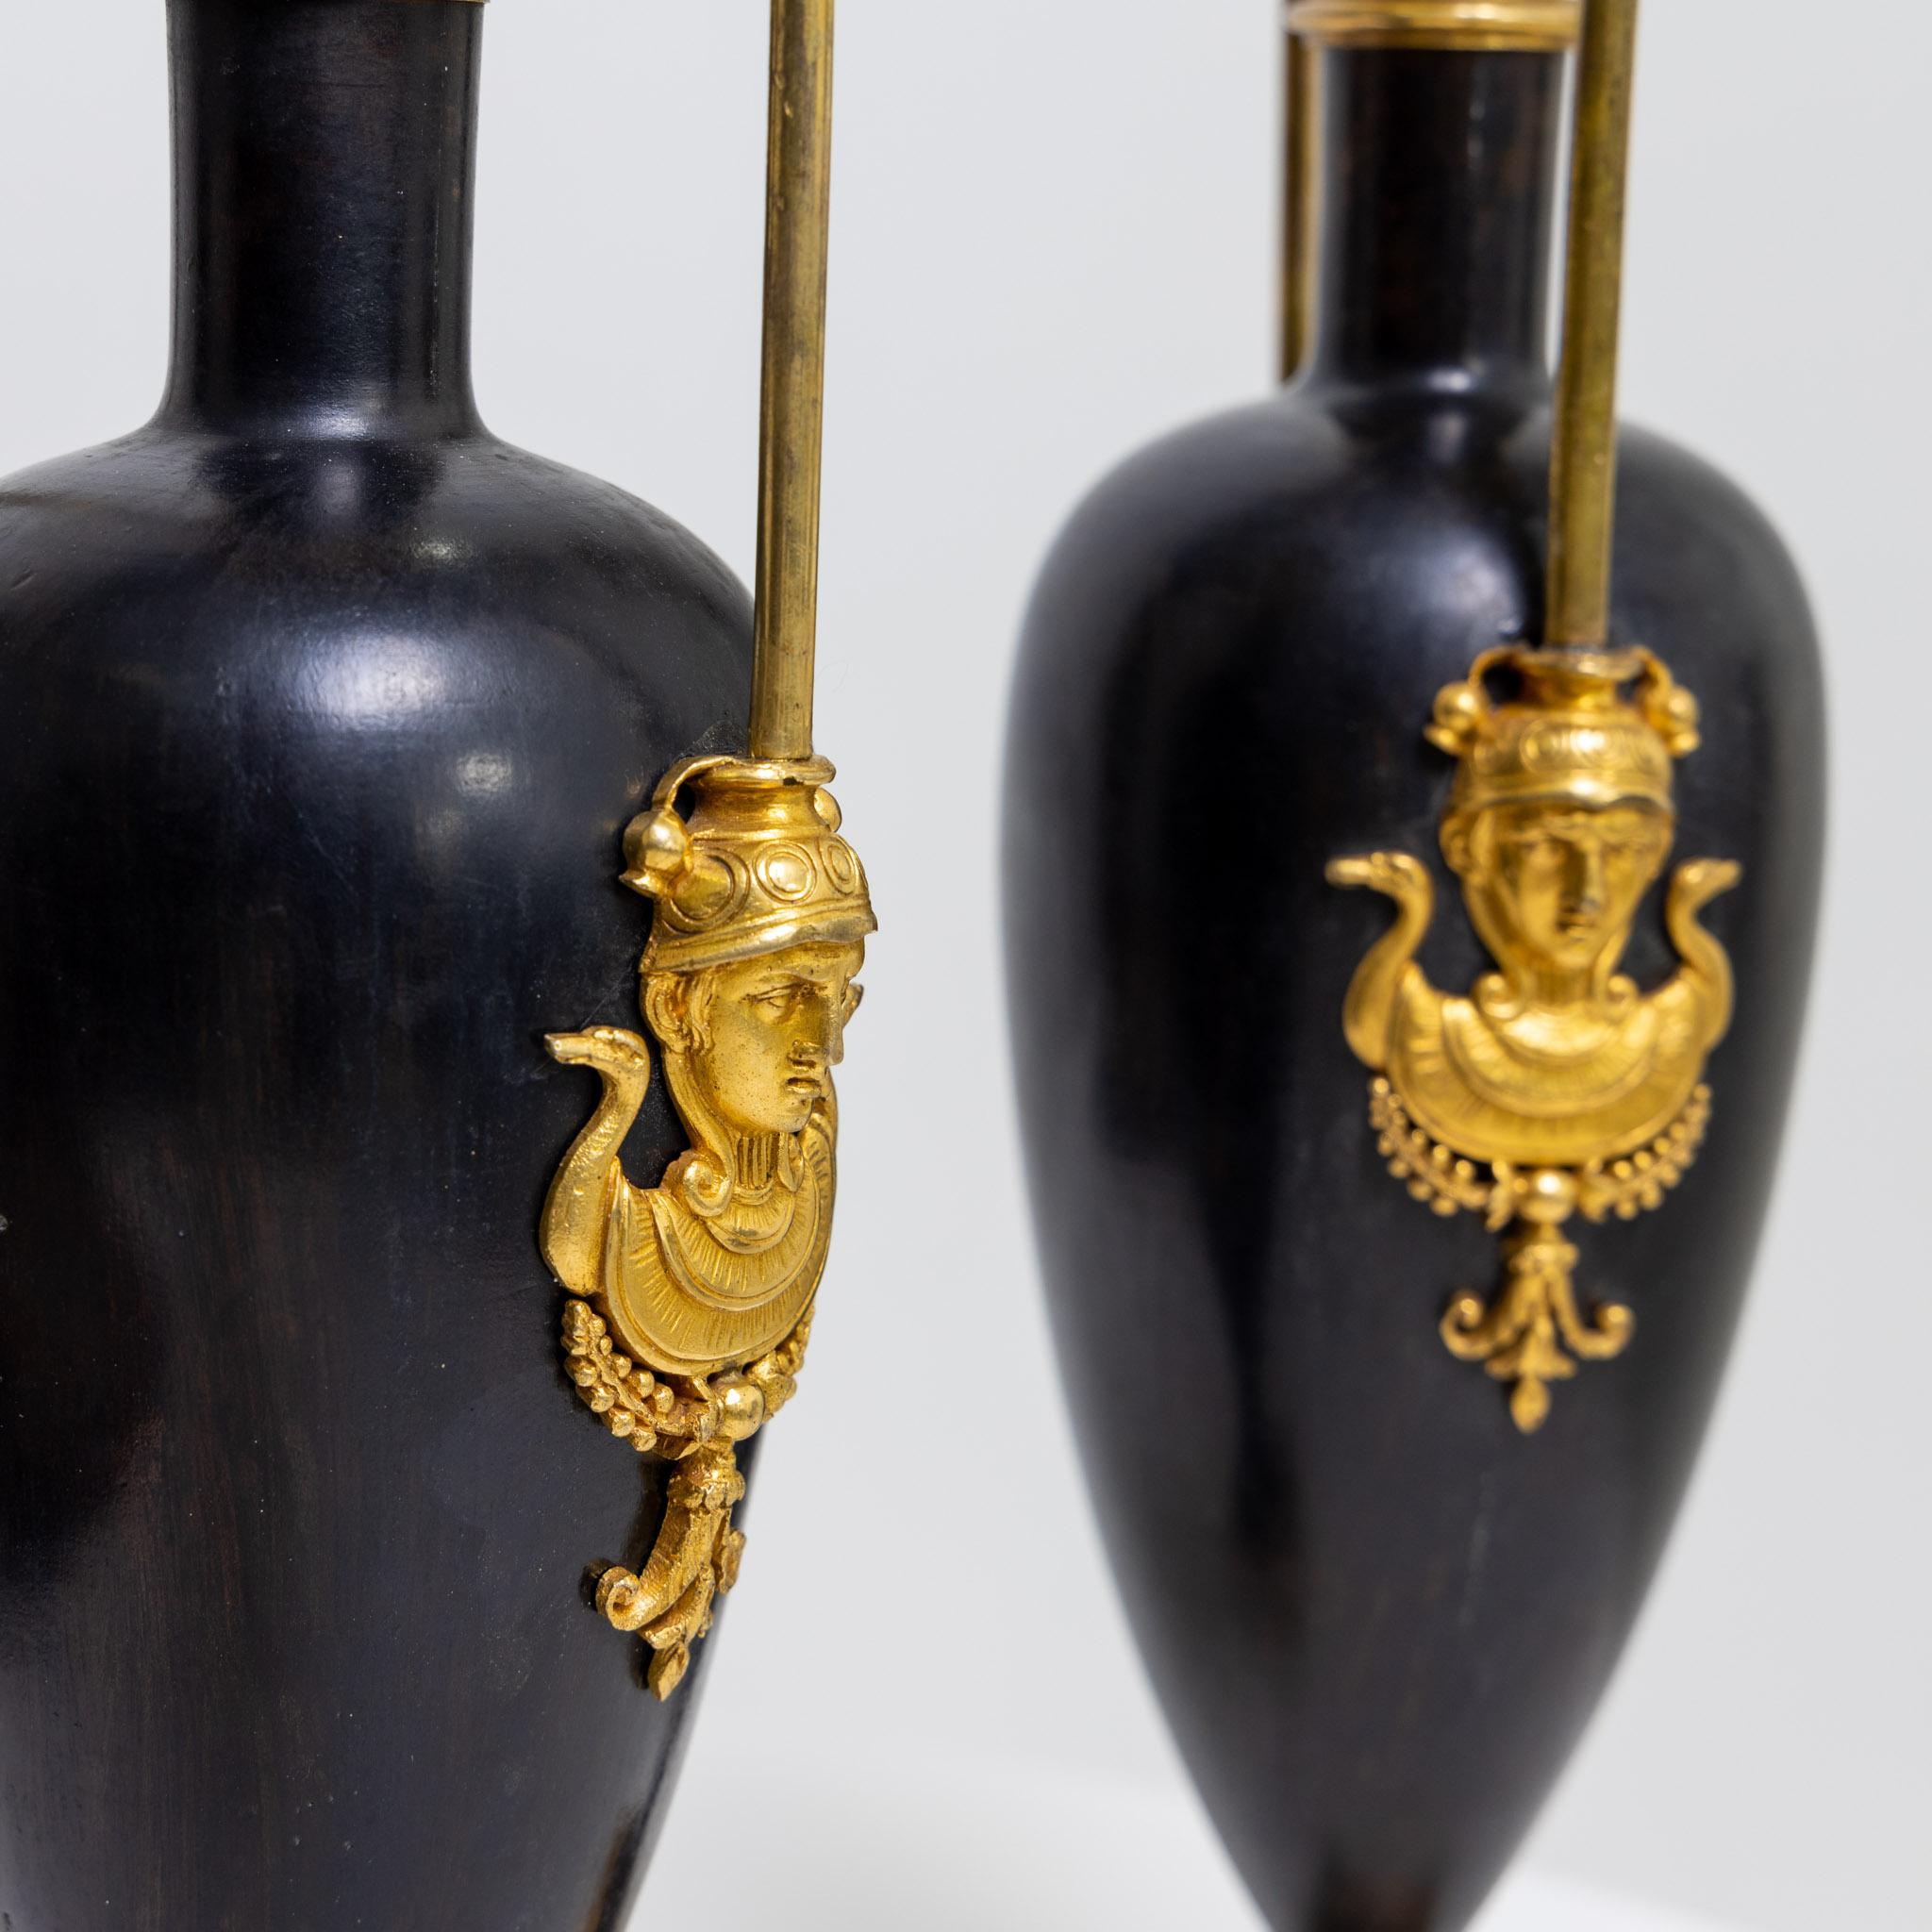 Retour D'egypte Vases, Early 19th Century In Good Condition For Sale In Greding, DE